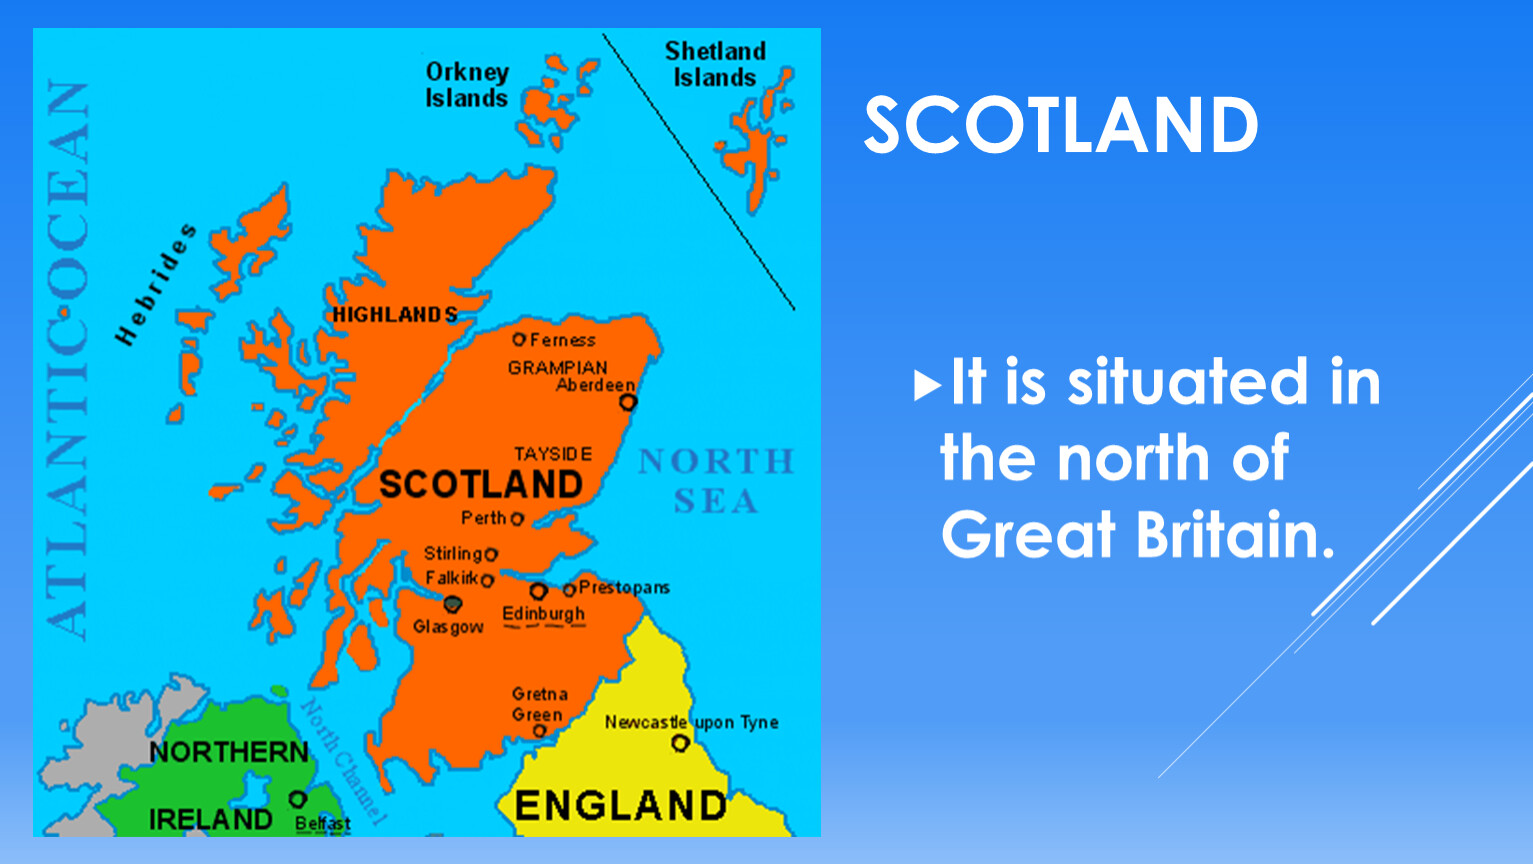 Scotland It is situated in the north of.